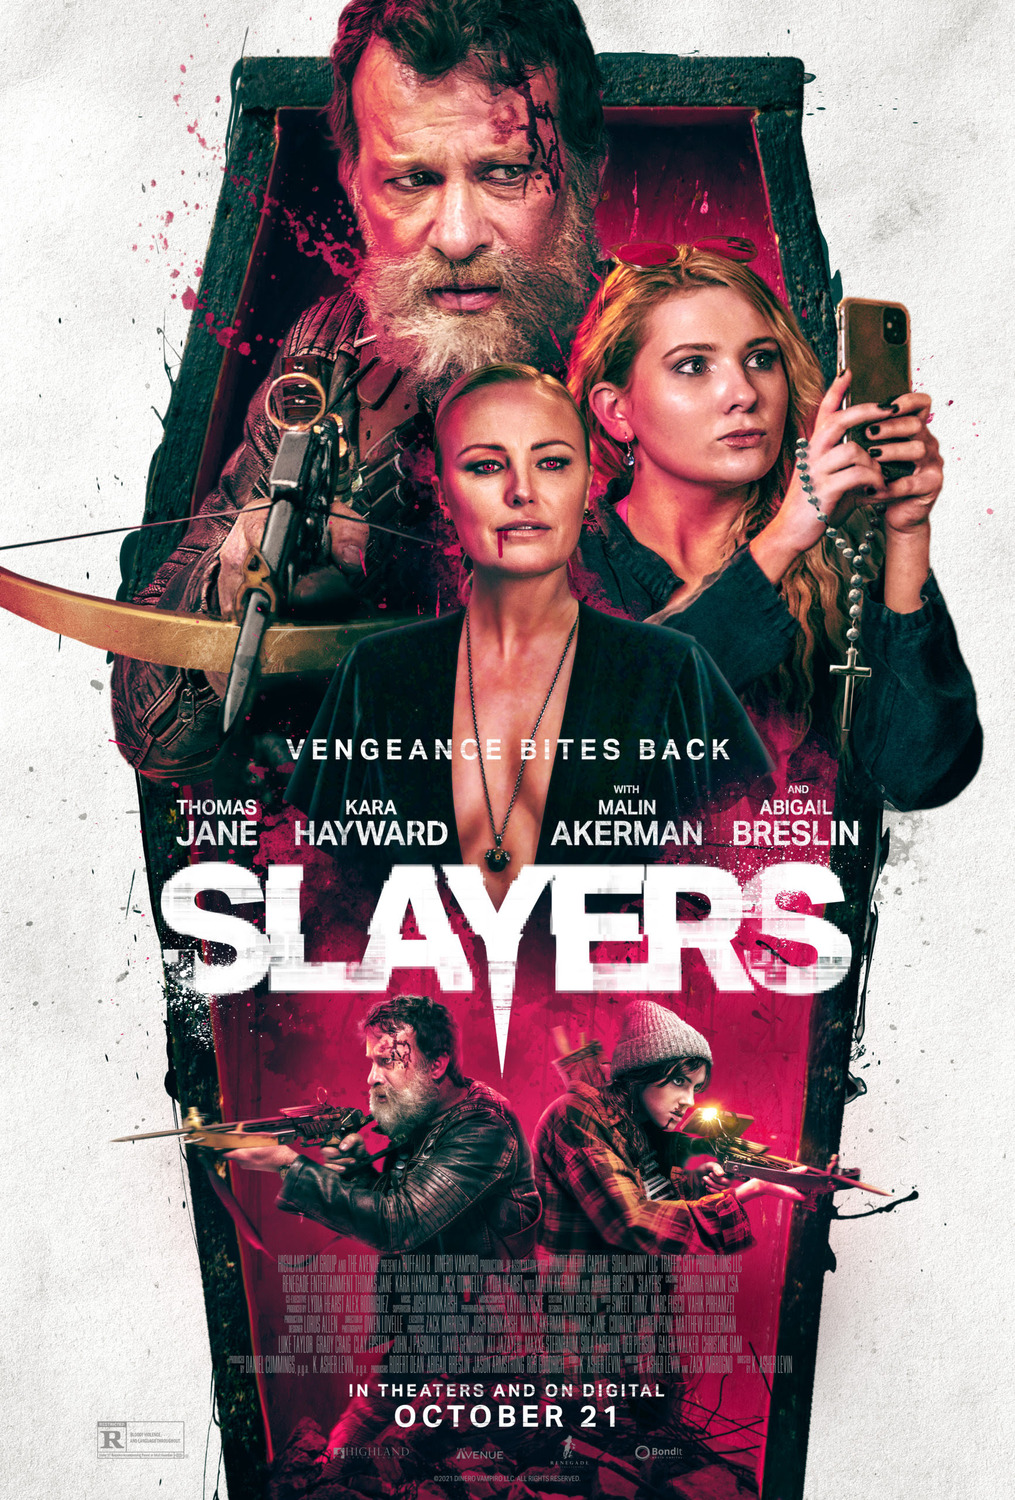 Slayers Trailer & Poster